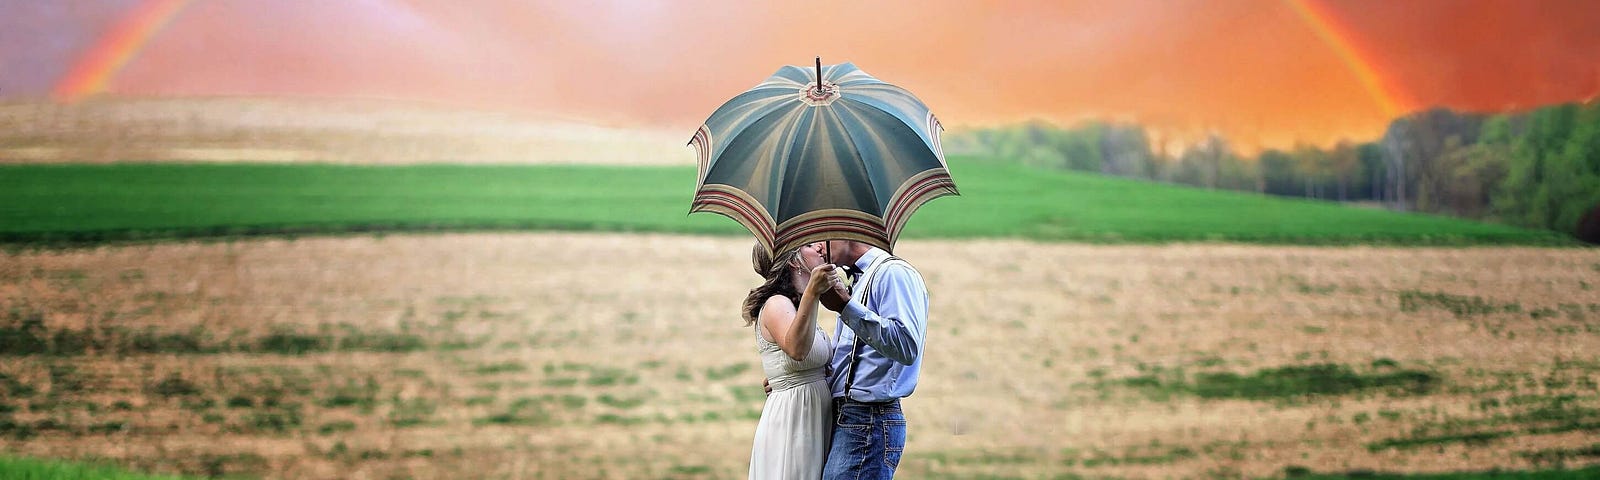 Evoking the concept behind Finneas debut album ‘Optimist’, the image shows a couple kissing on a field under an umbrella with a rainbow in the background